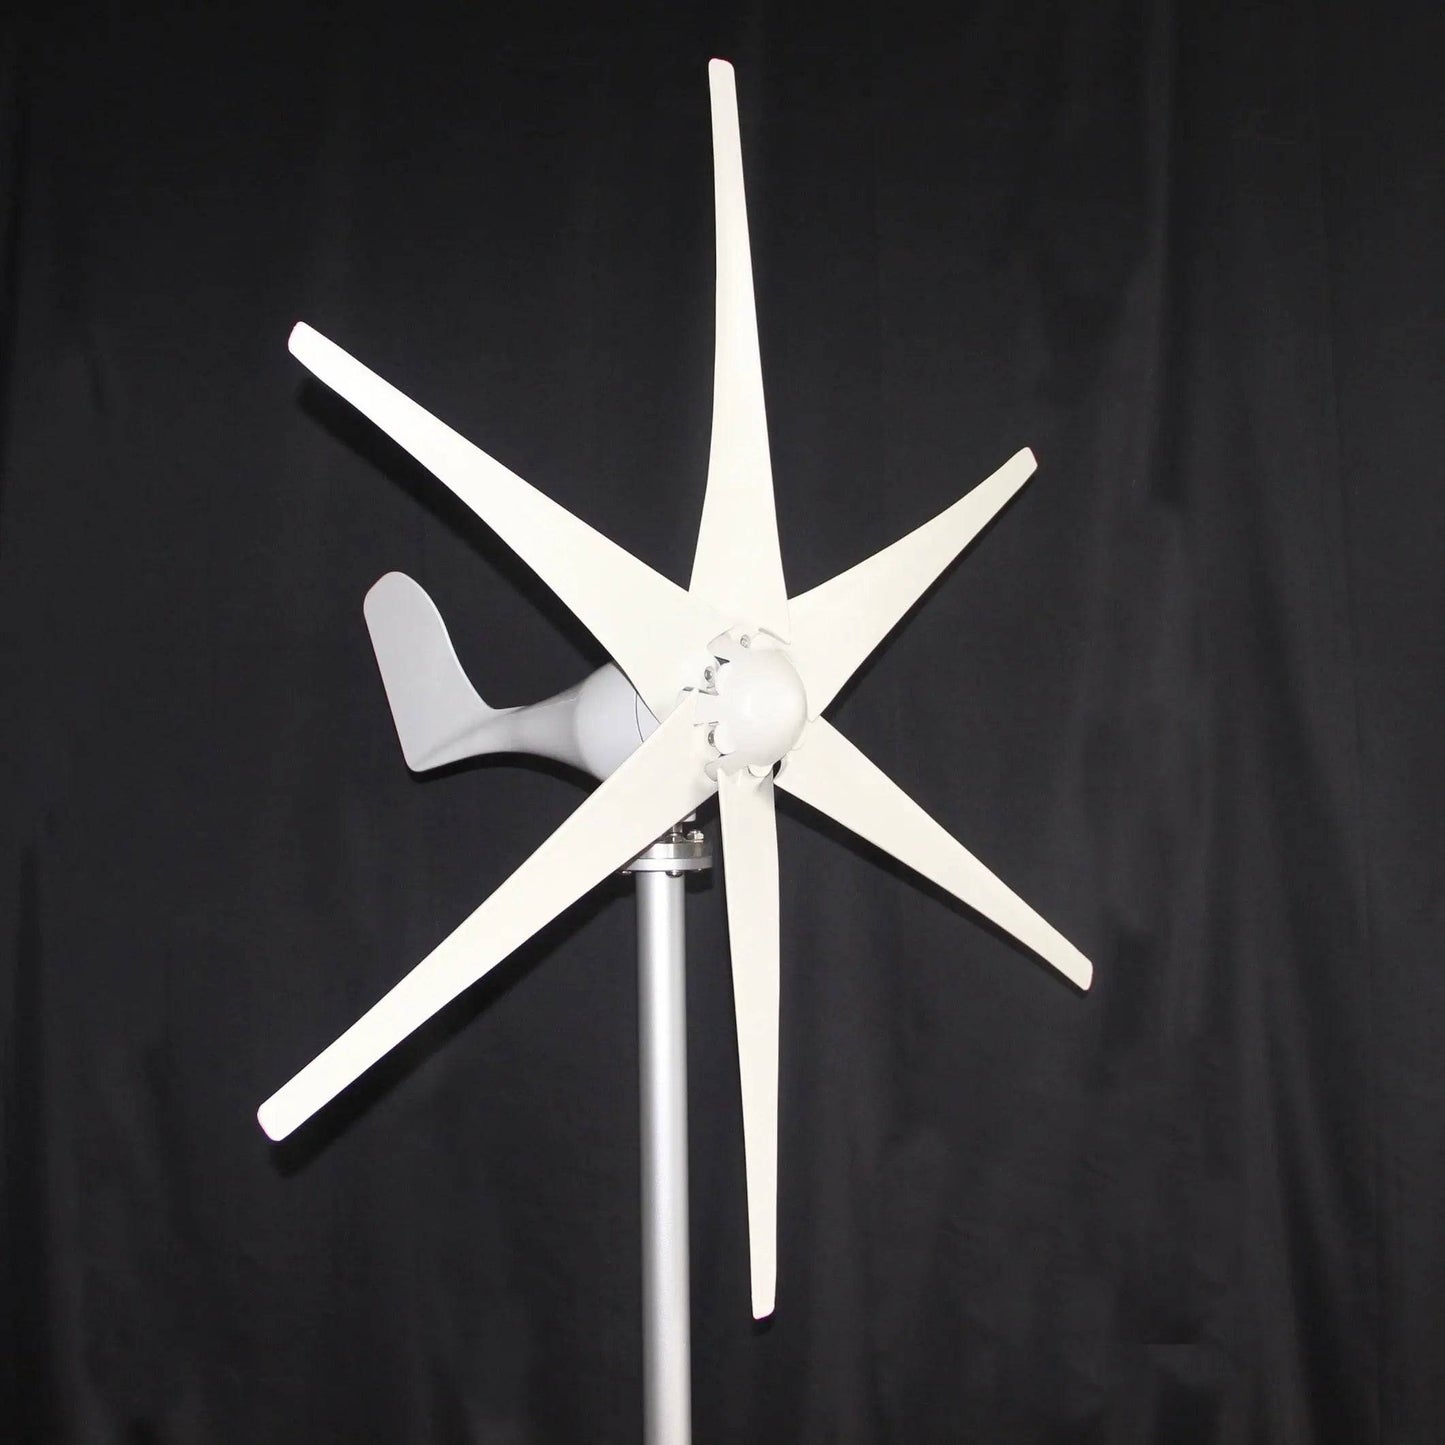 Wind Turbine Generator 800W Fit Windmill With Wind Controller 12/24V - 54 Energy - Renewable Energy Store